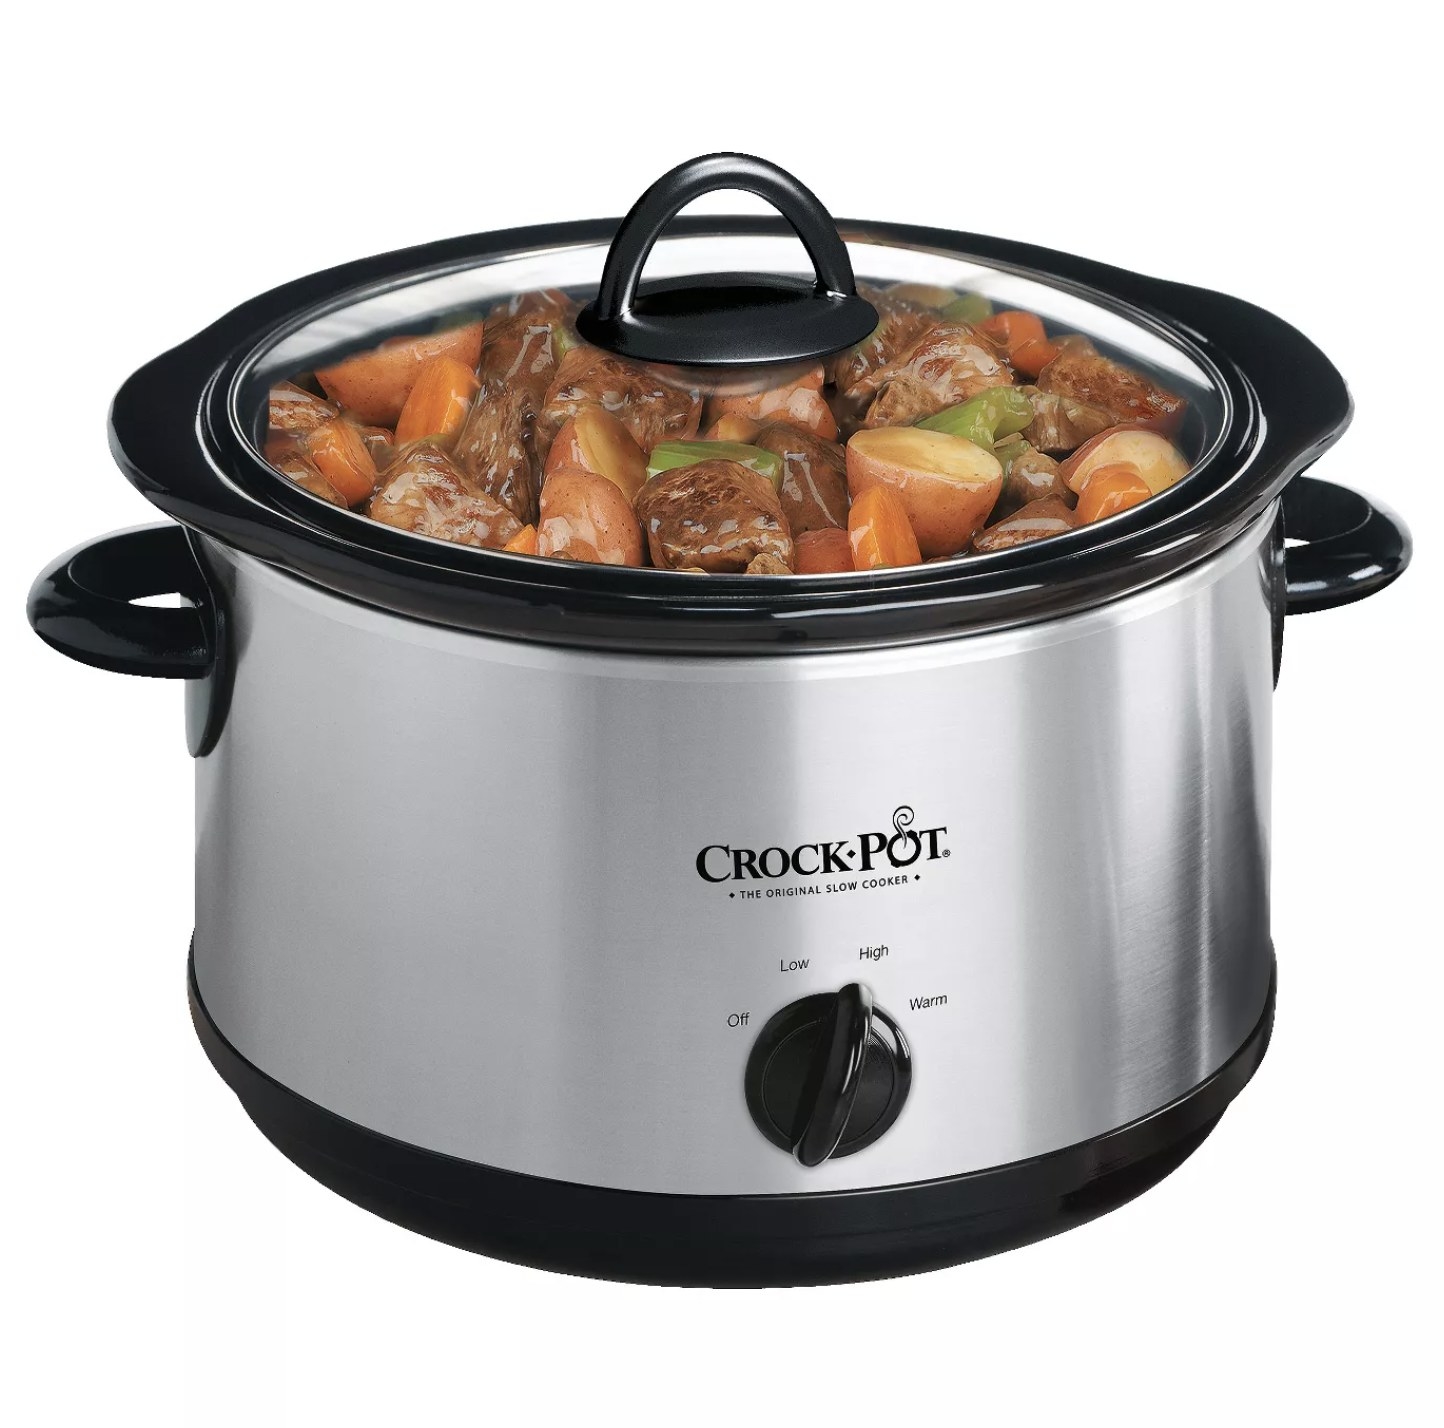 A stainless steel crock-pot with beef stew cooking inside it